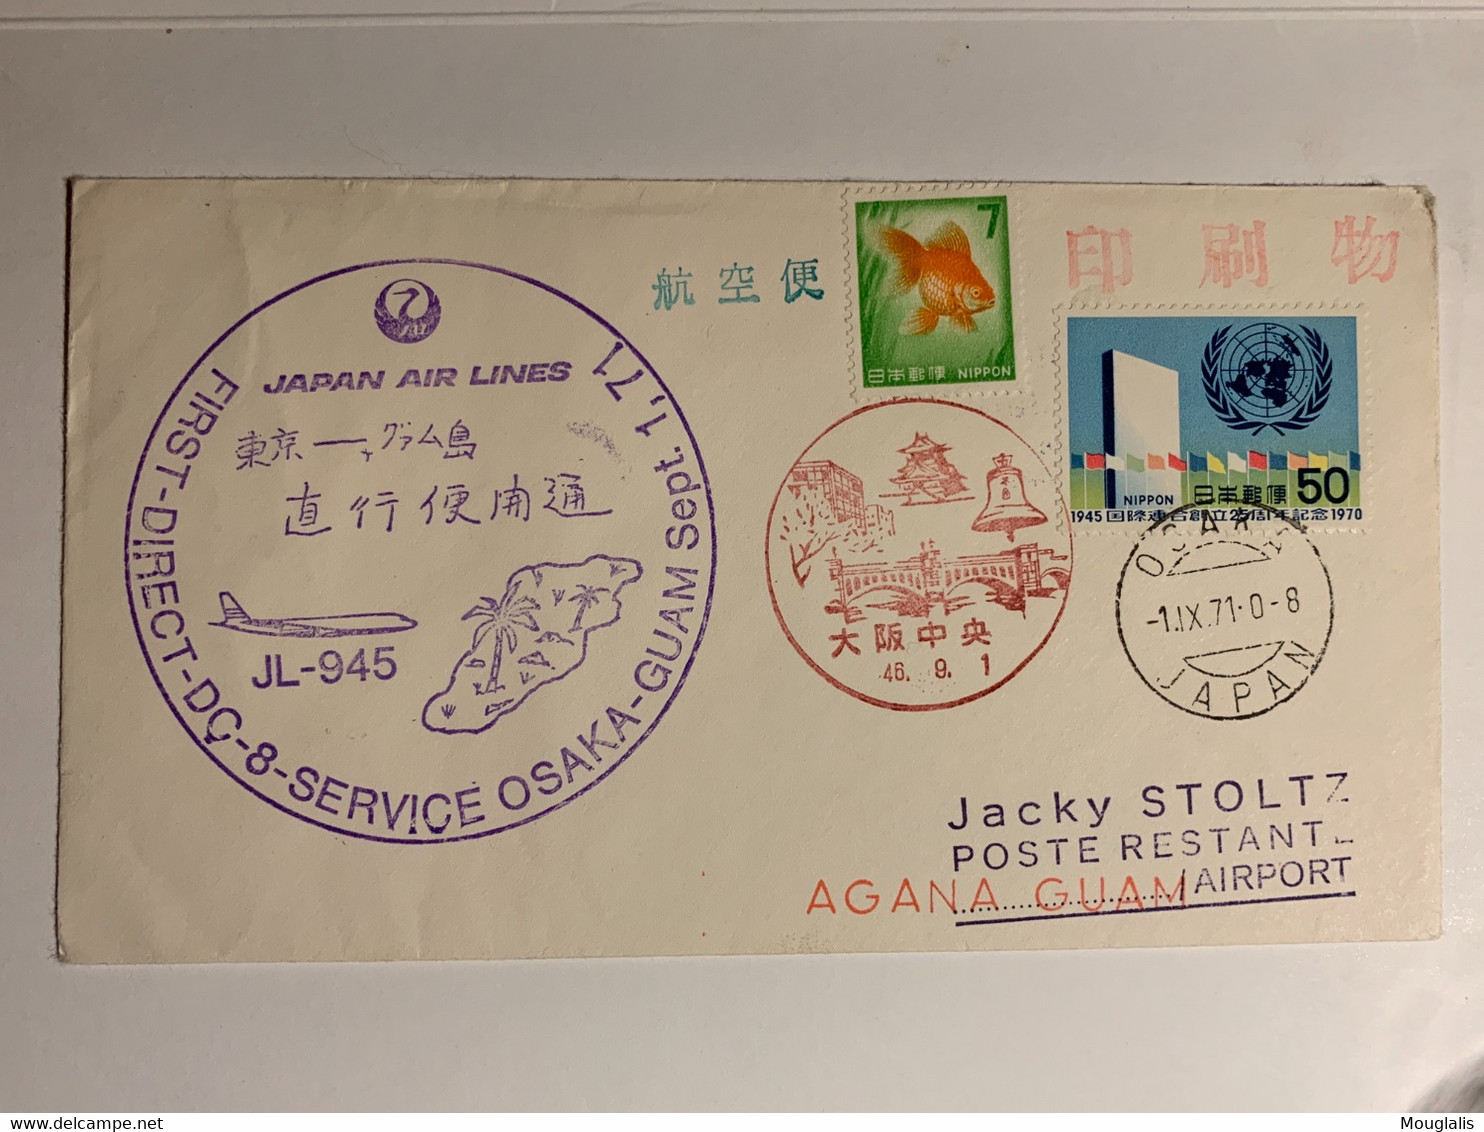 Japon Air Lines First Direct-DC-8-service Osaka Grand Tampon Rond Violet Agana Guam Osaka 1971 - Luchtpost